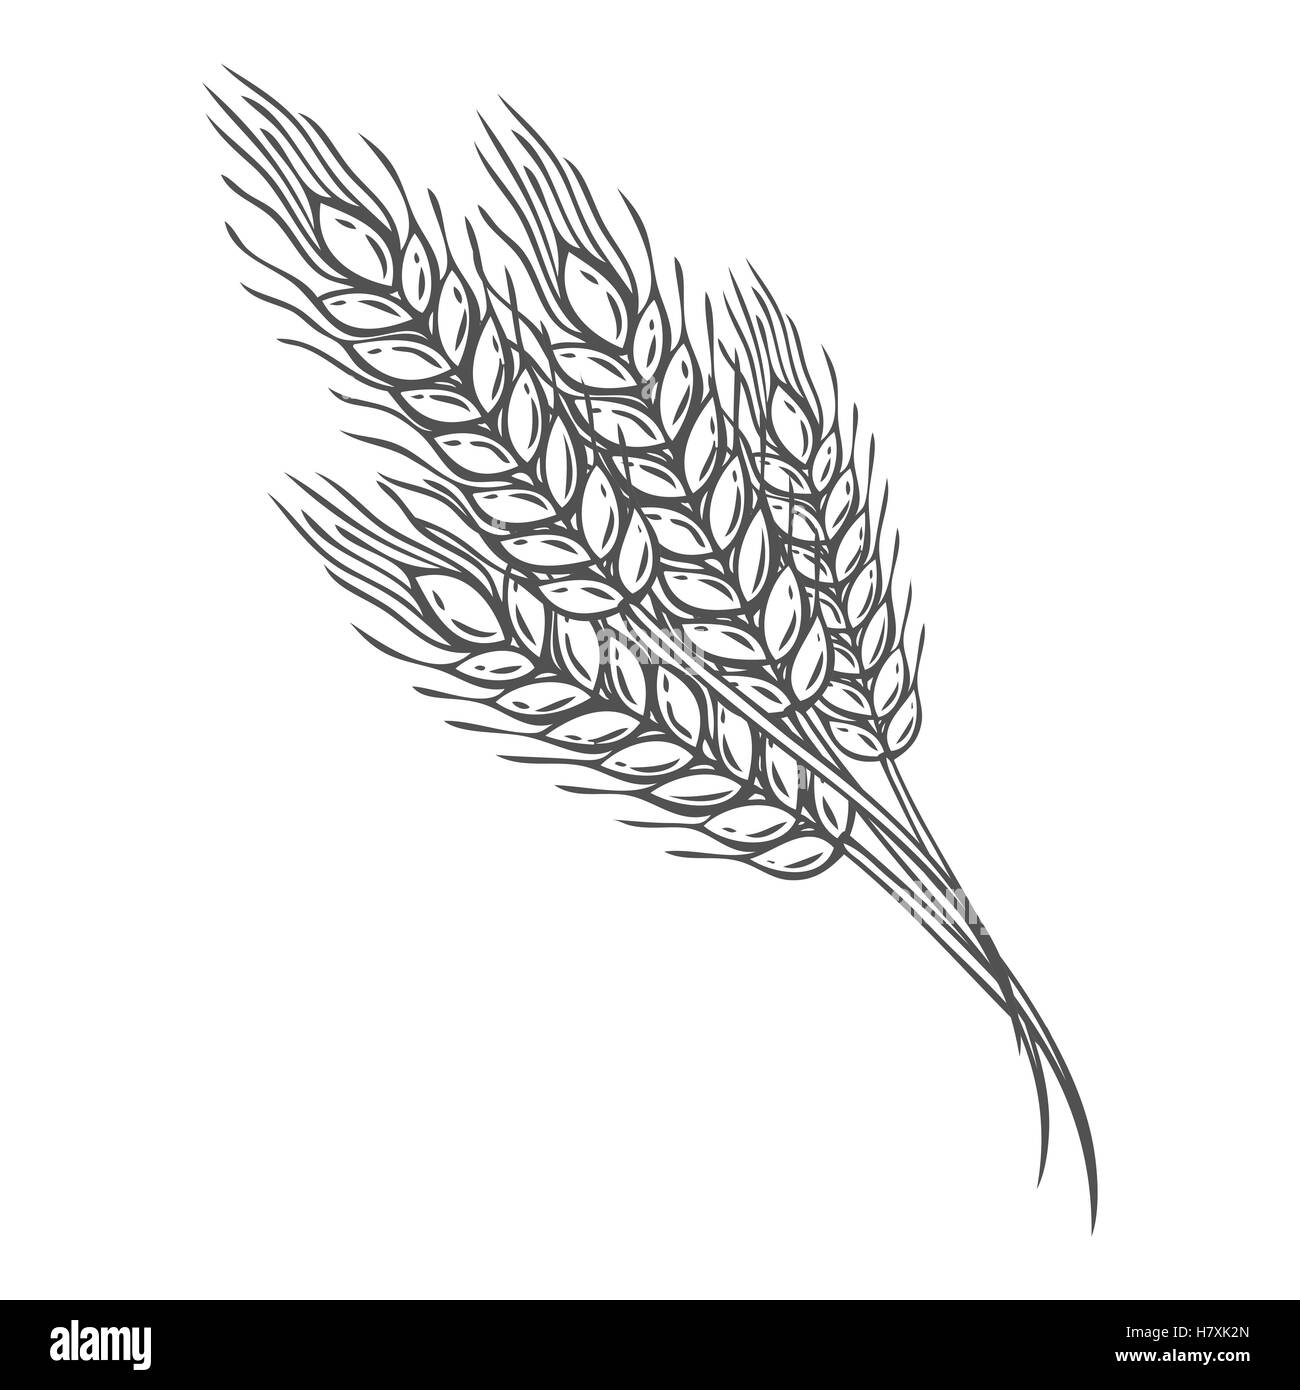 Wheat bread ears cereal crop sketch hand drawn vector illustration. Black ear isolated on white background. Gluten food ingredie Stock Vector